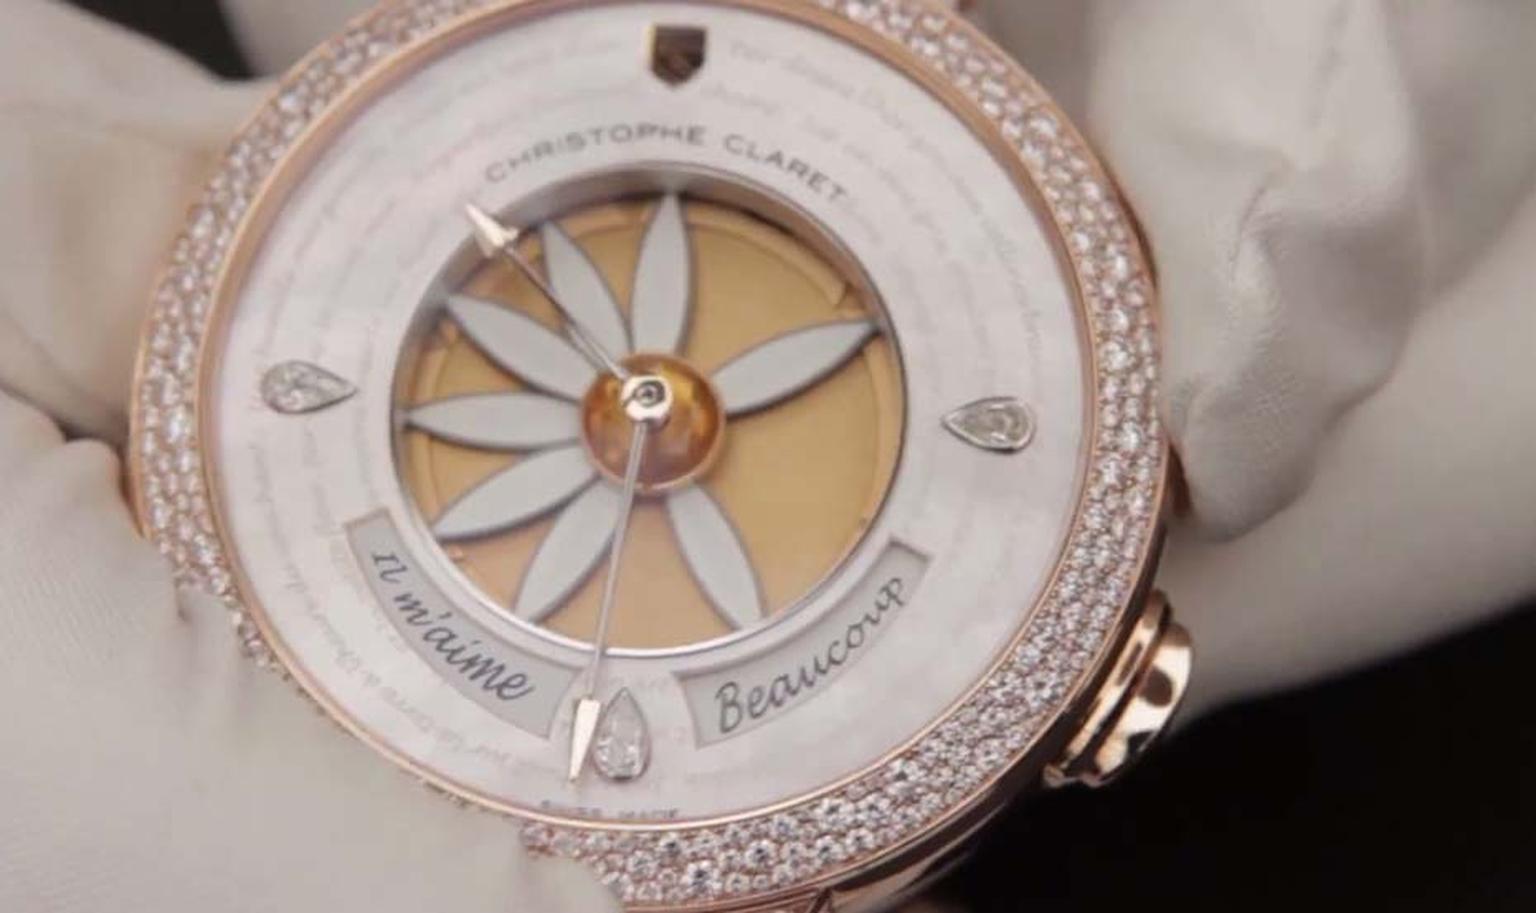 Christophe Claret Margot watch spells out whether he loves you, or loves you not, in petals